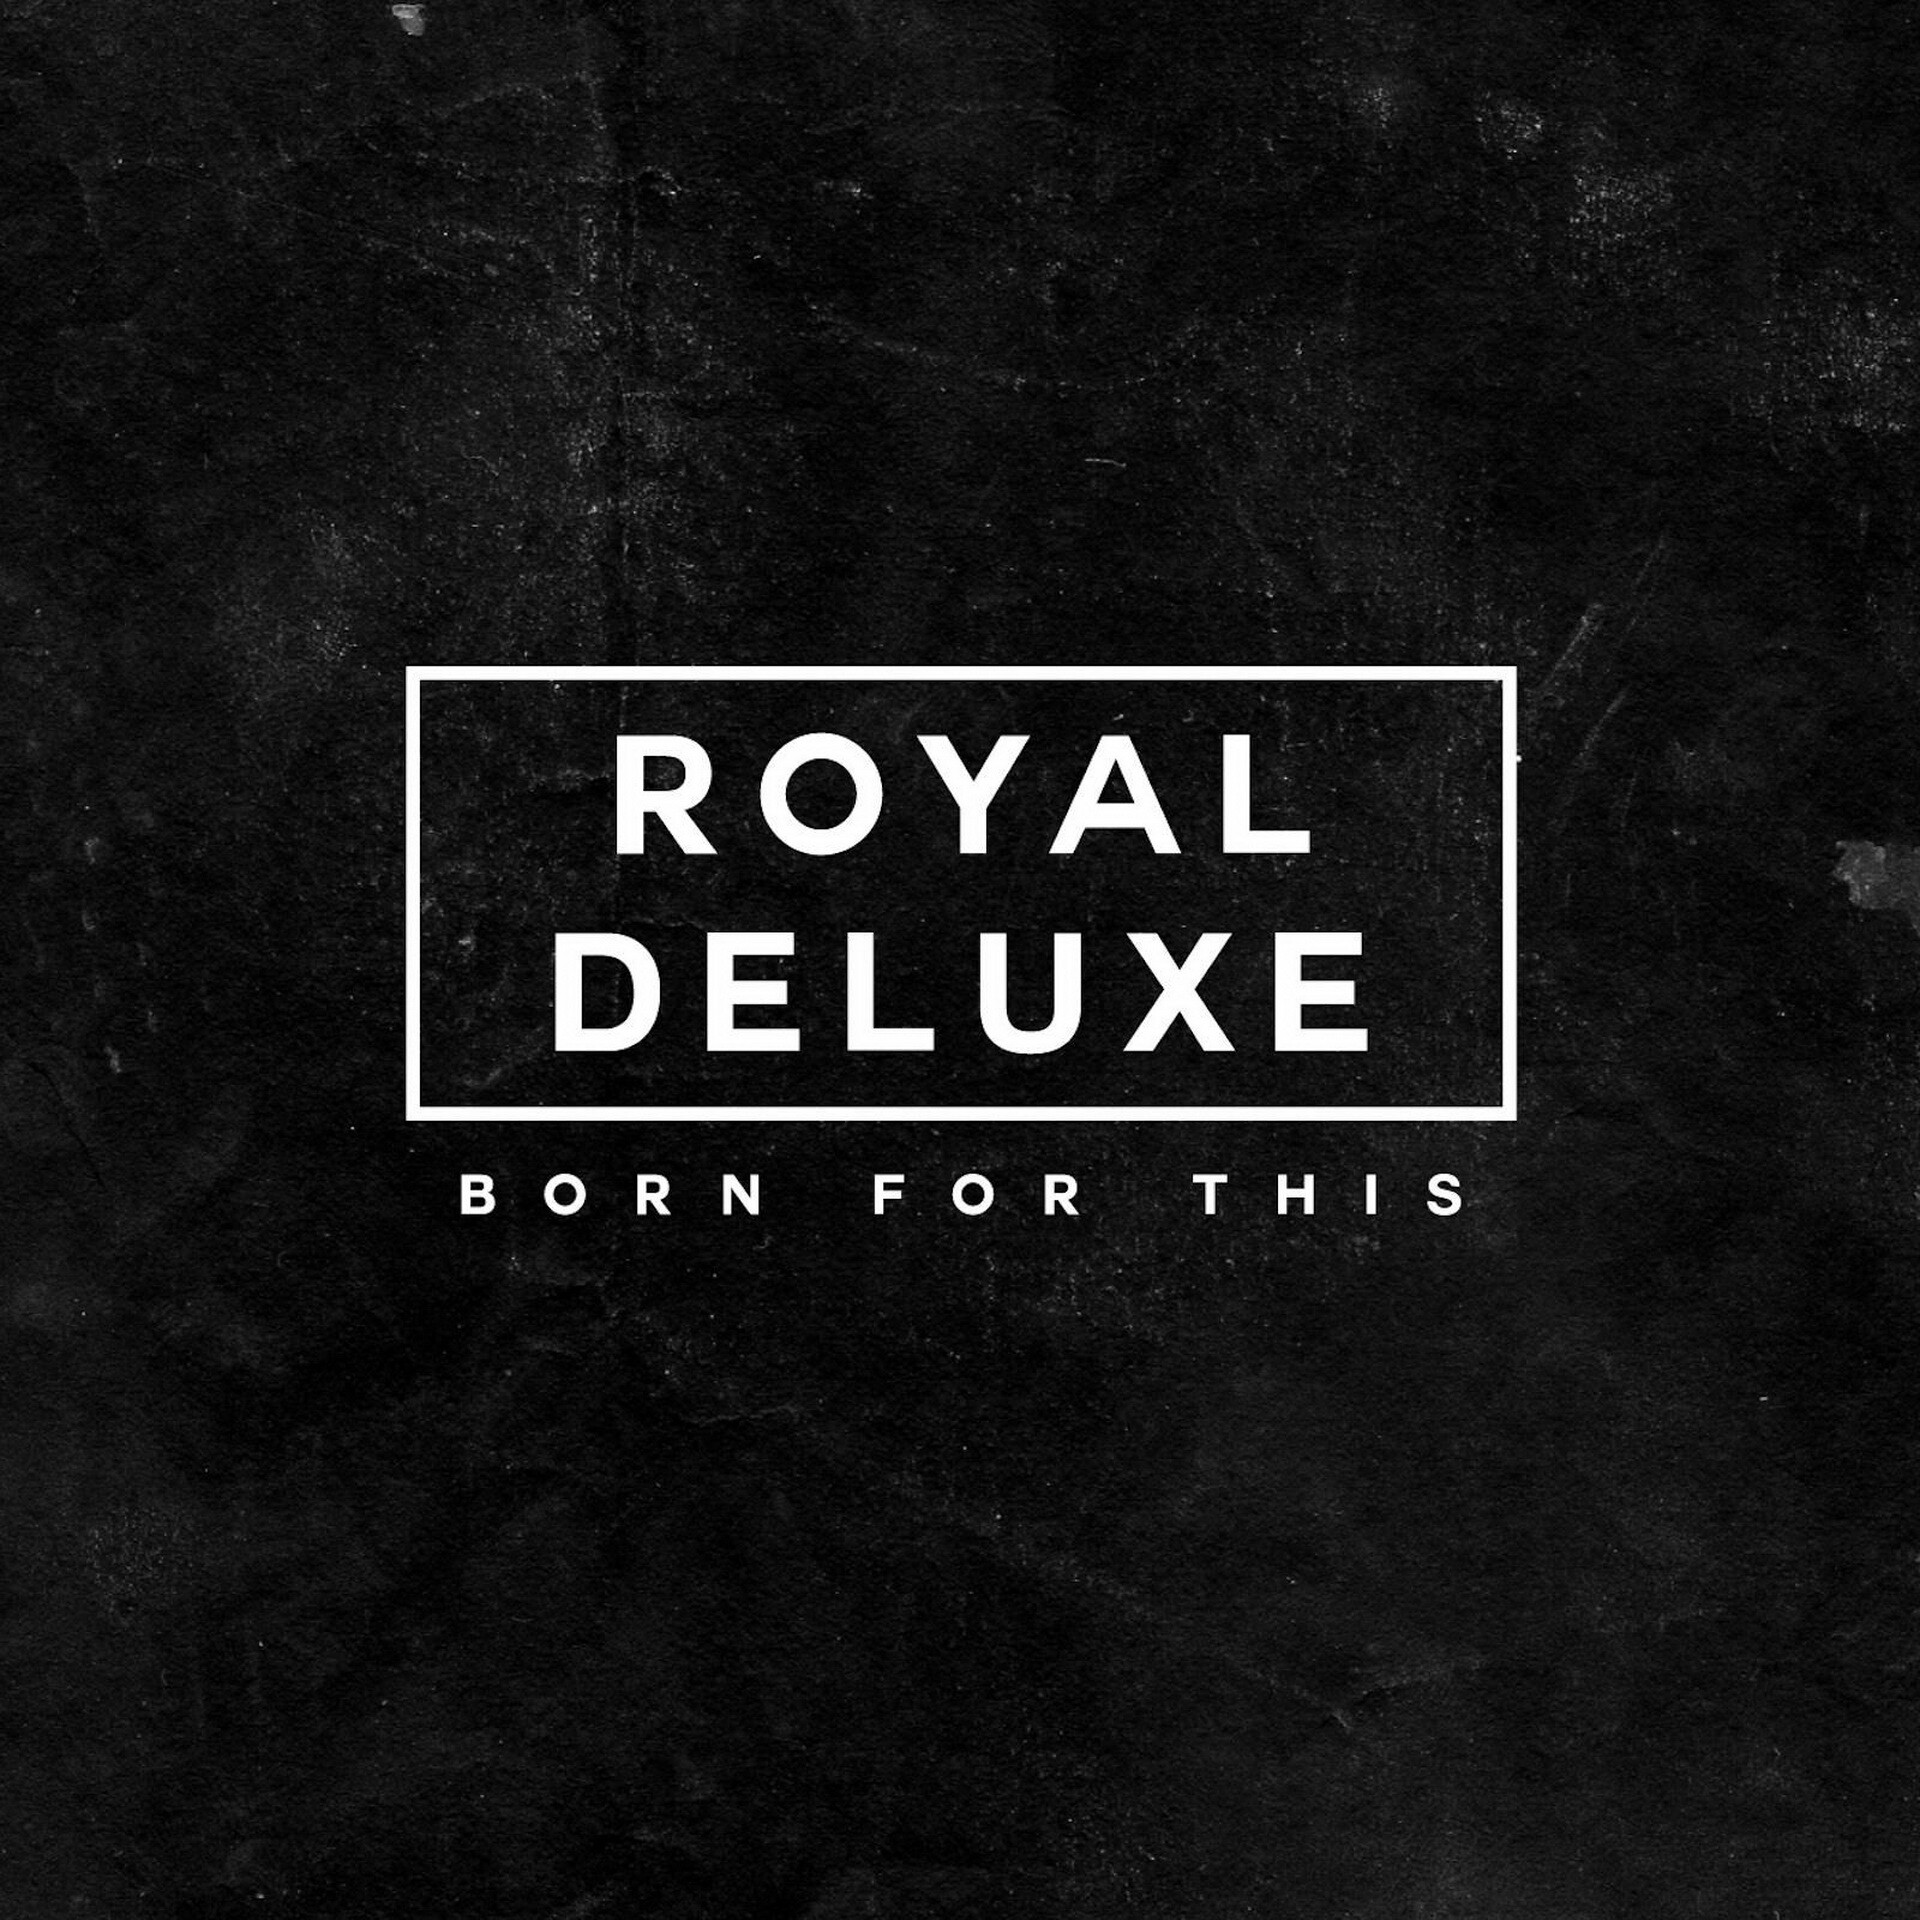 Royal Deluxe's influences, Classic rock vibes, Modern sound, Musical inspirations, 1920x1920 HD Handy